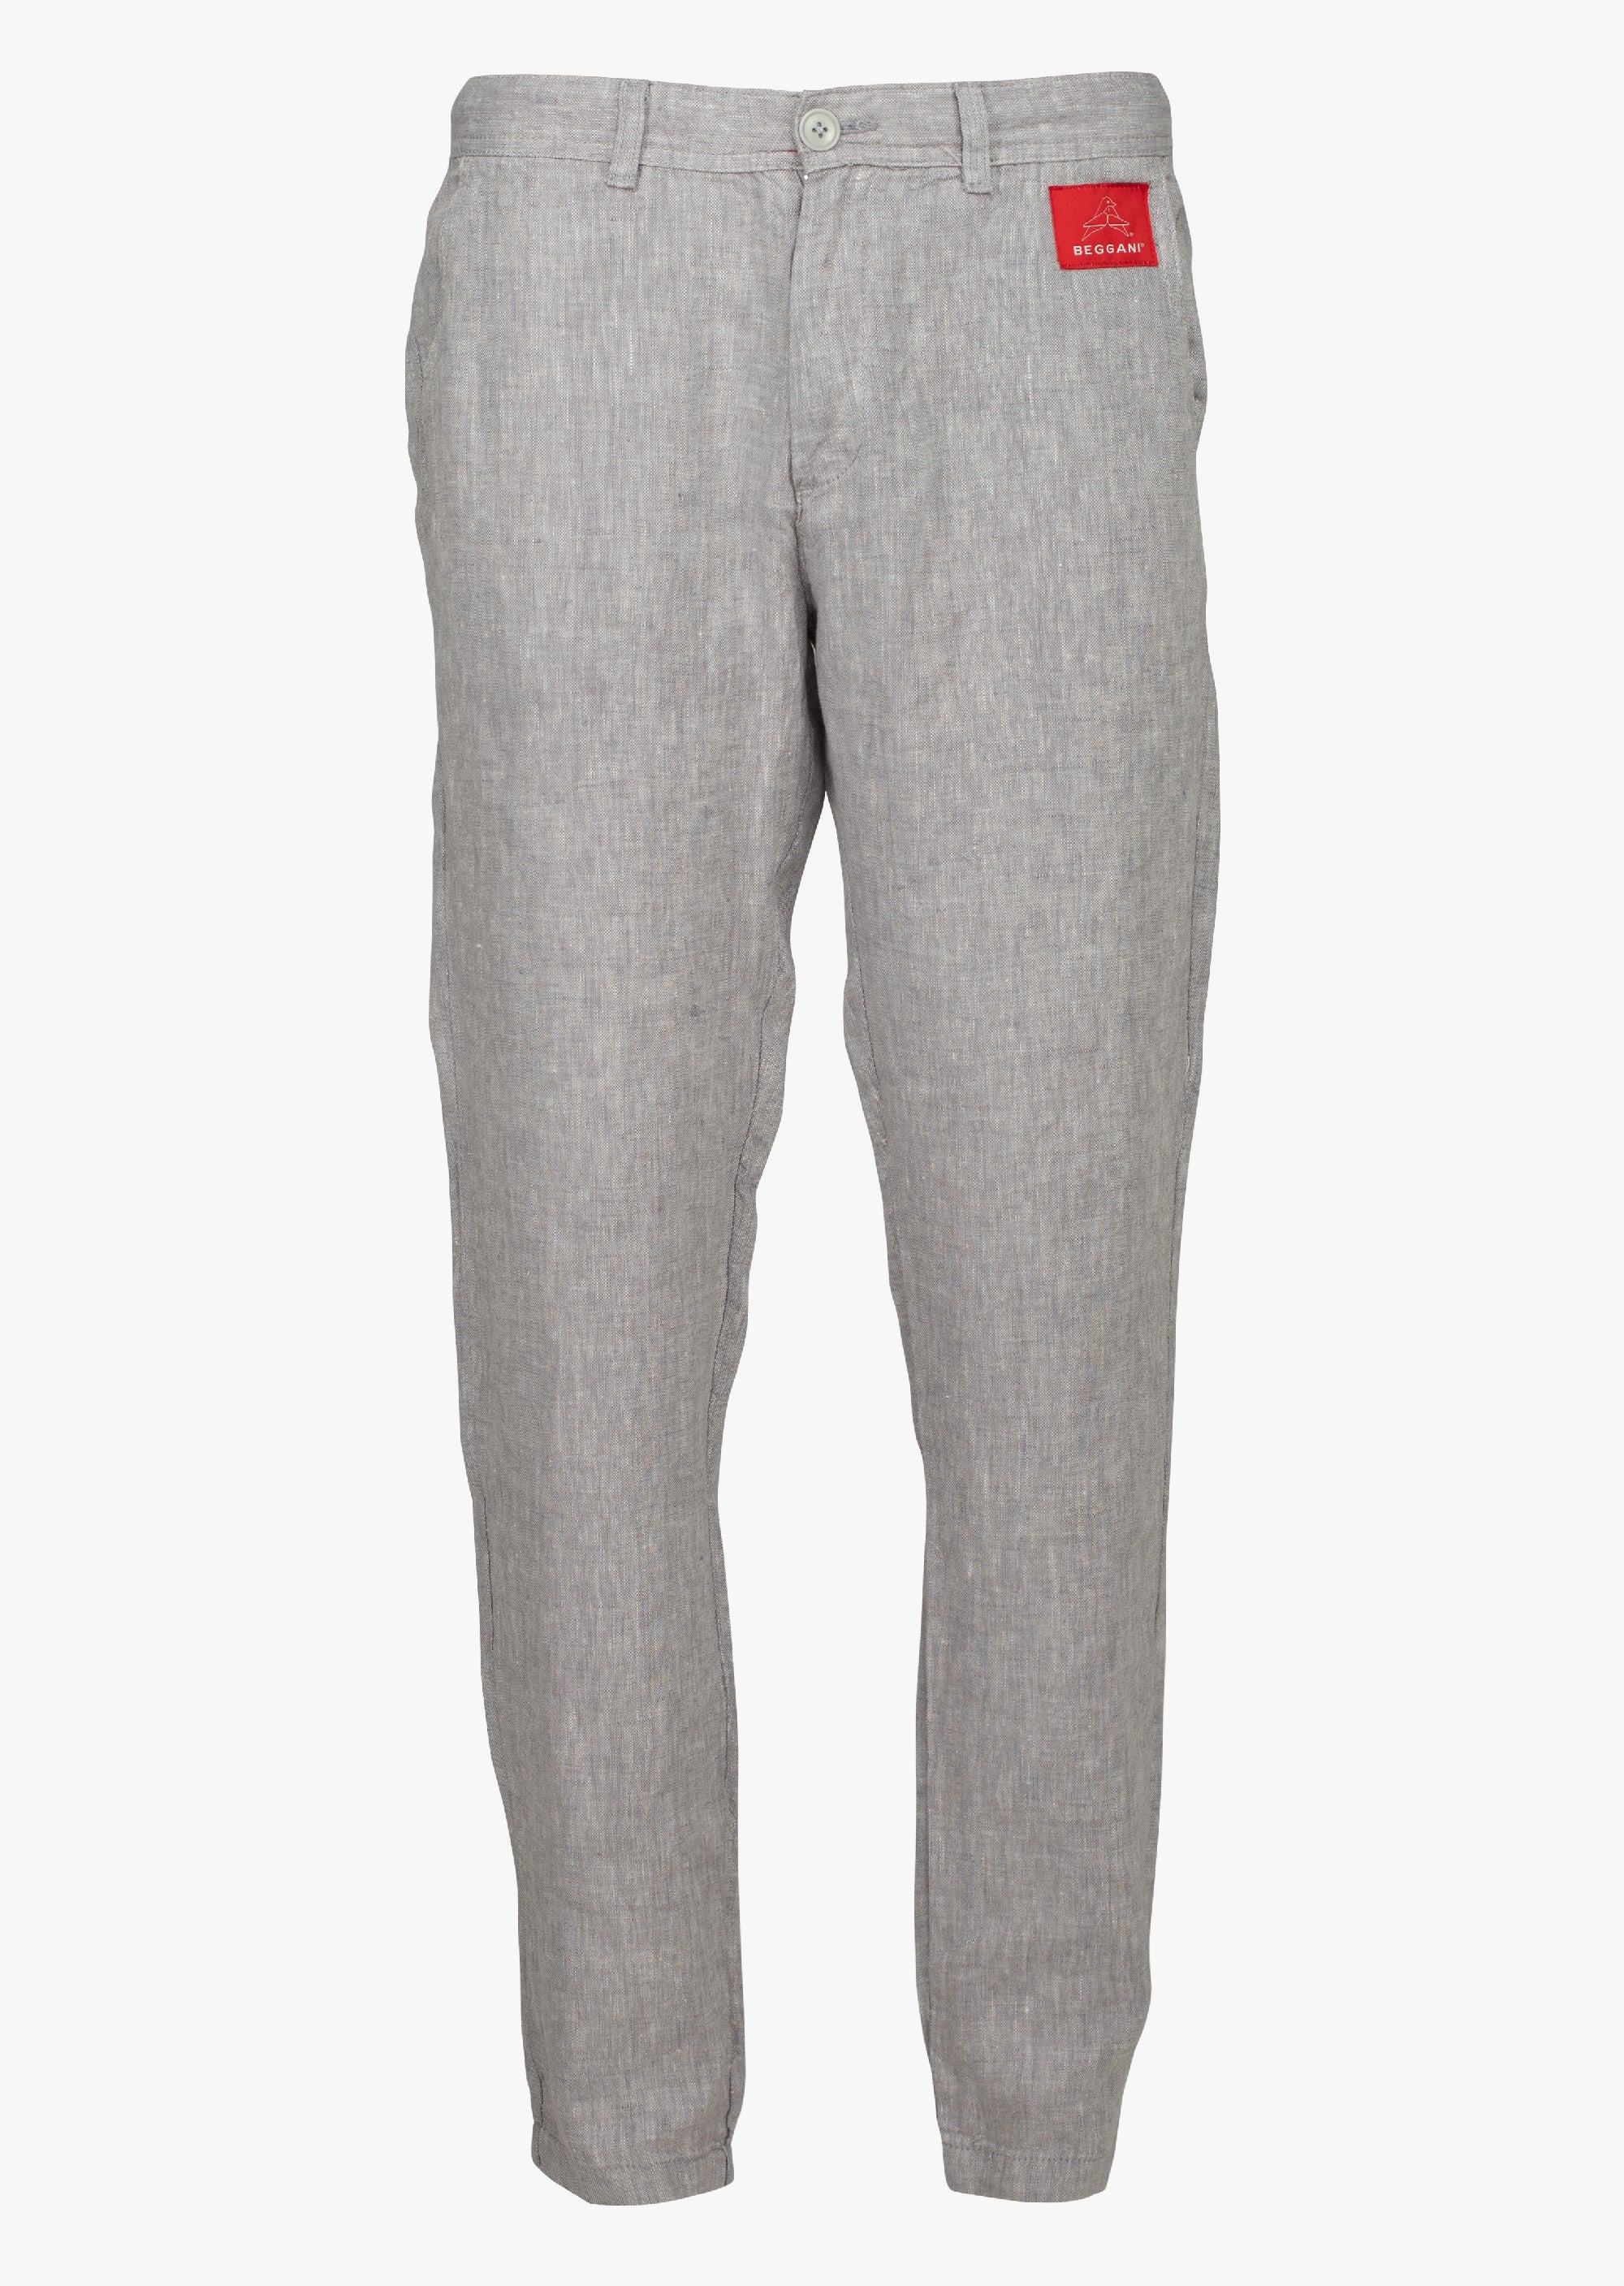 Pants of soft linen with logo BEGGANI